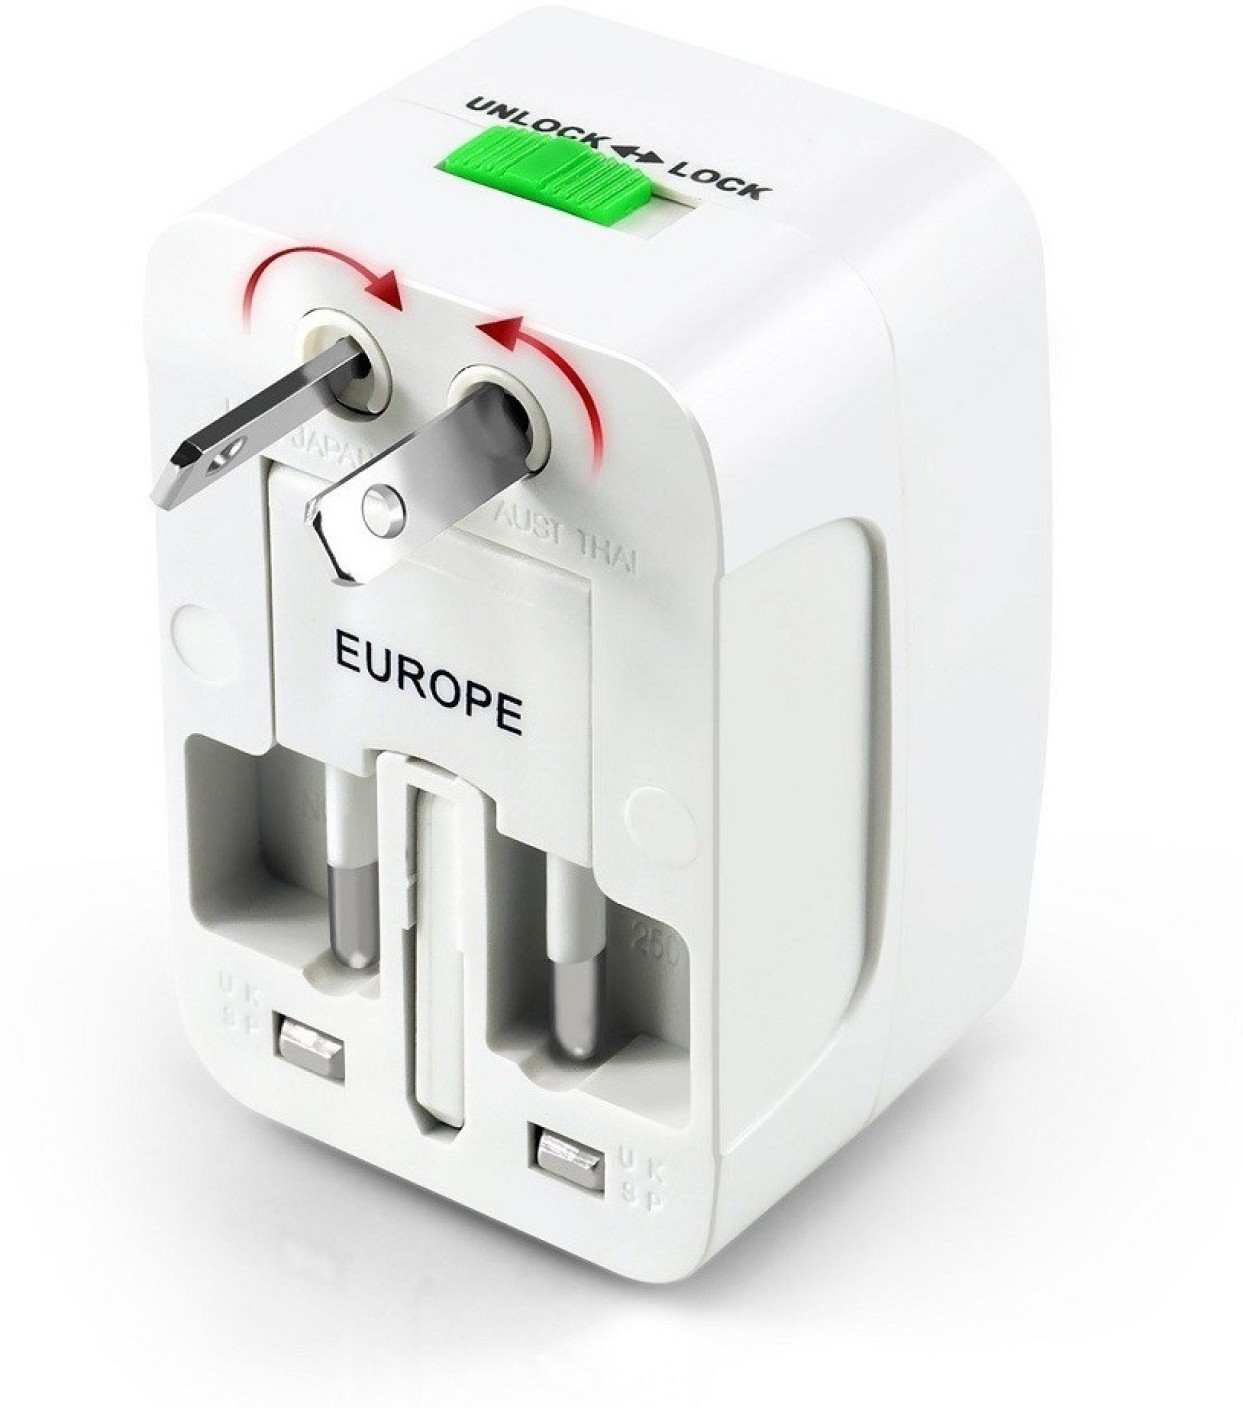 best universal travel adapter in india